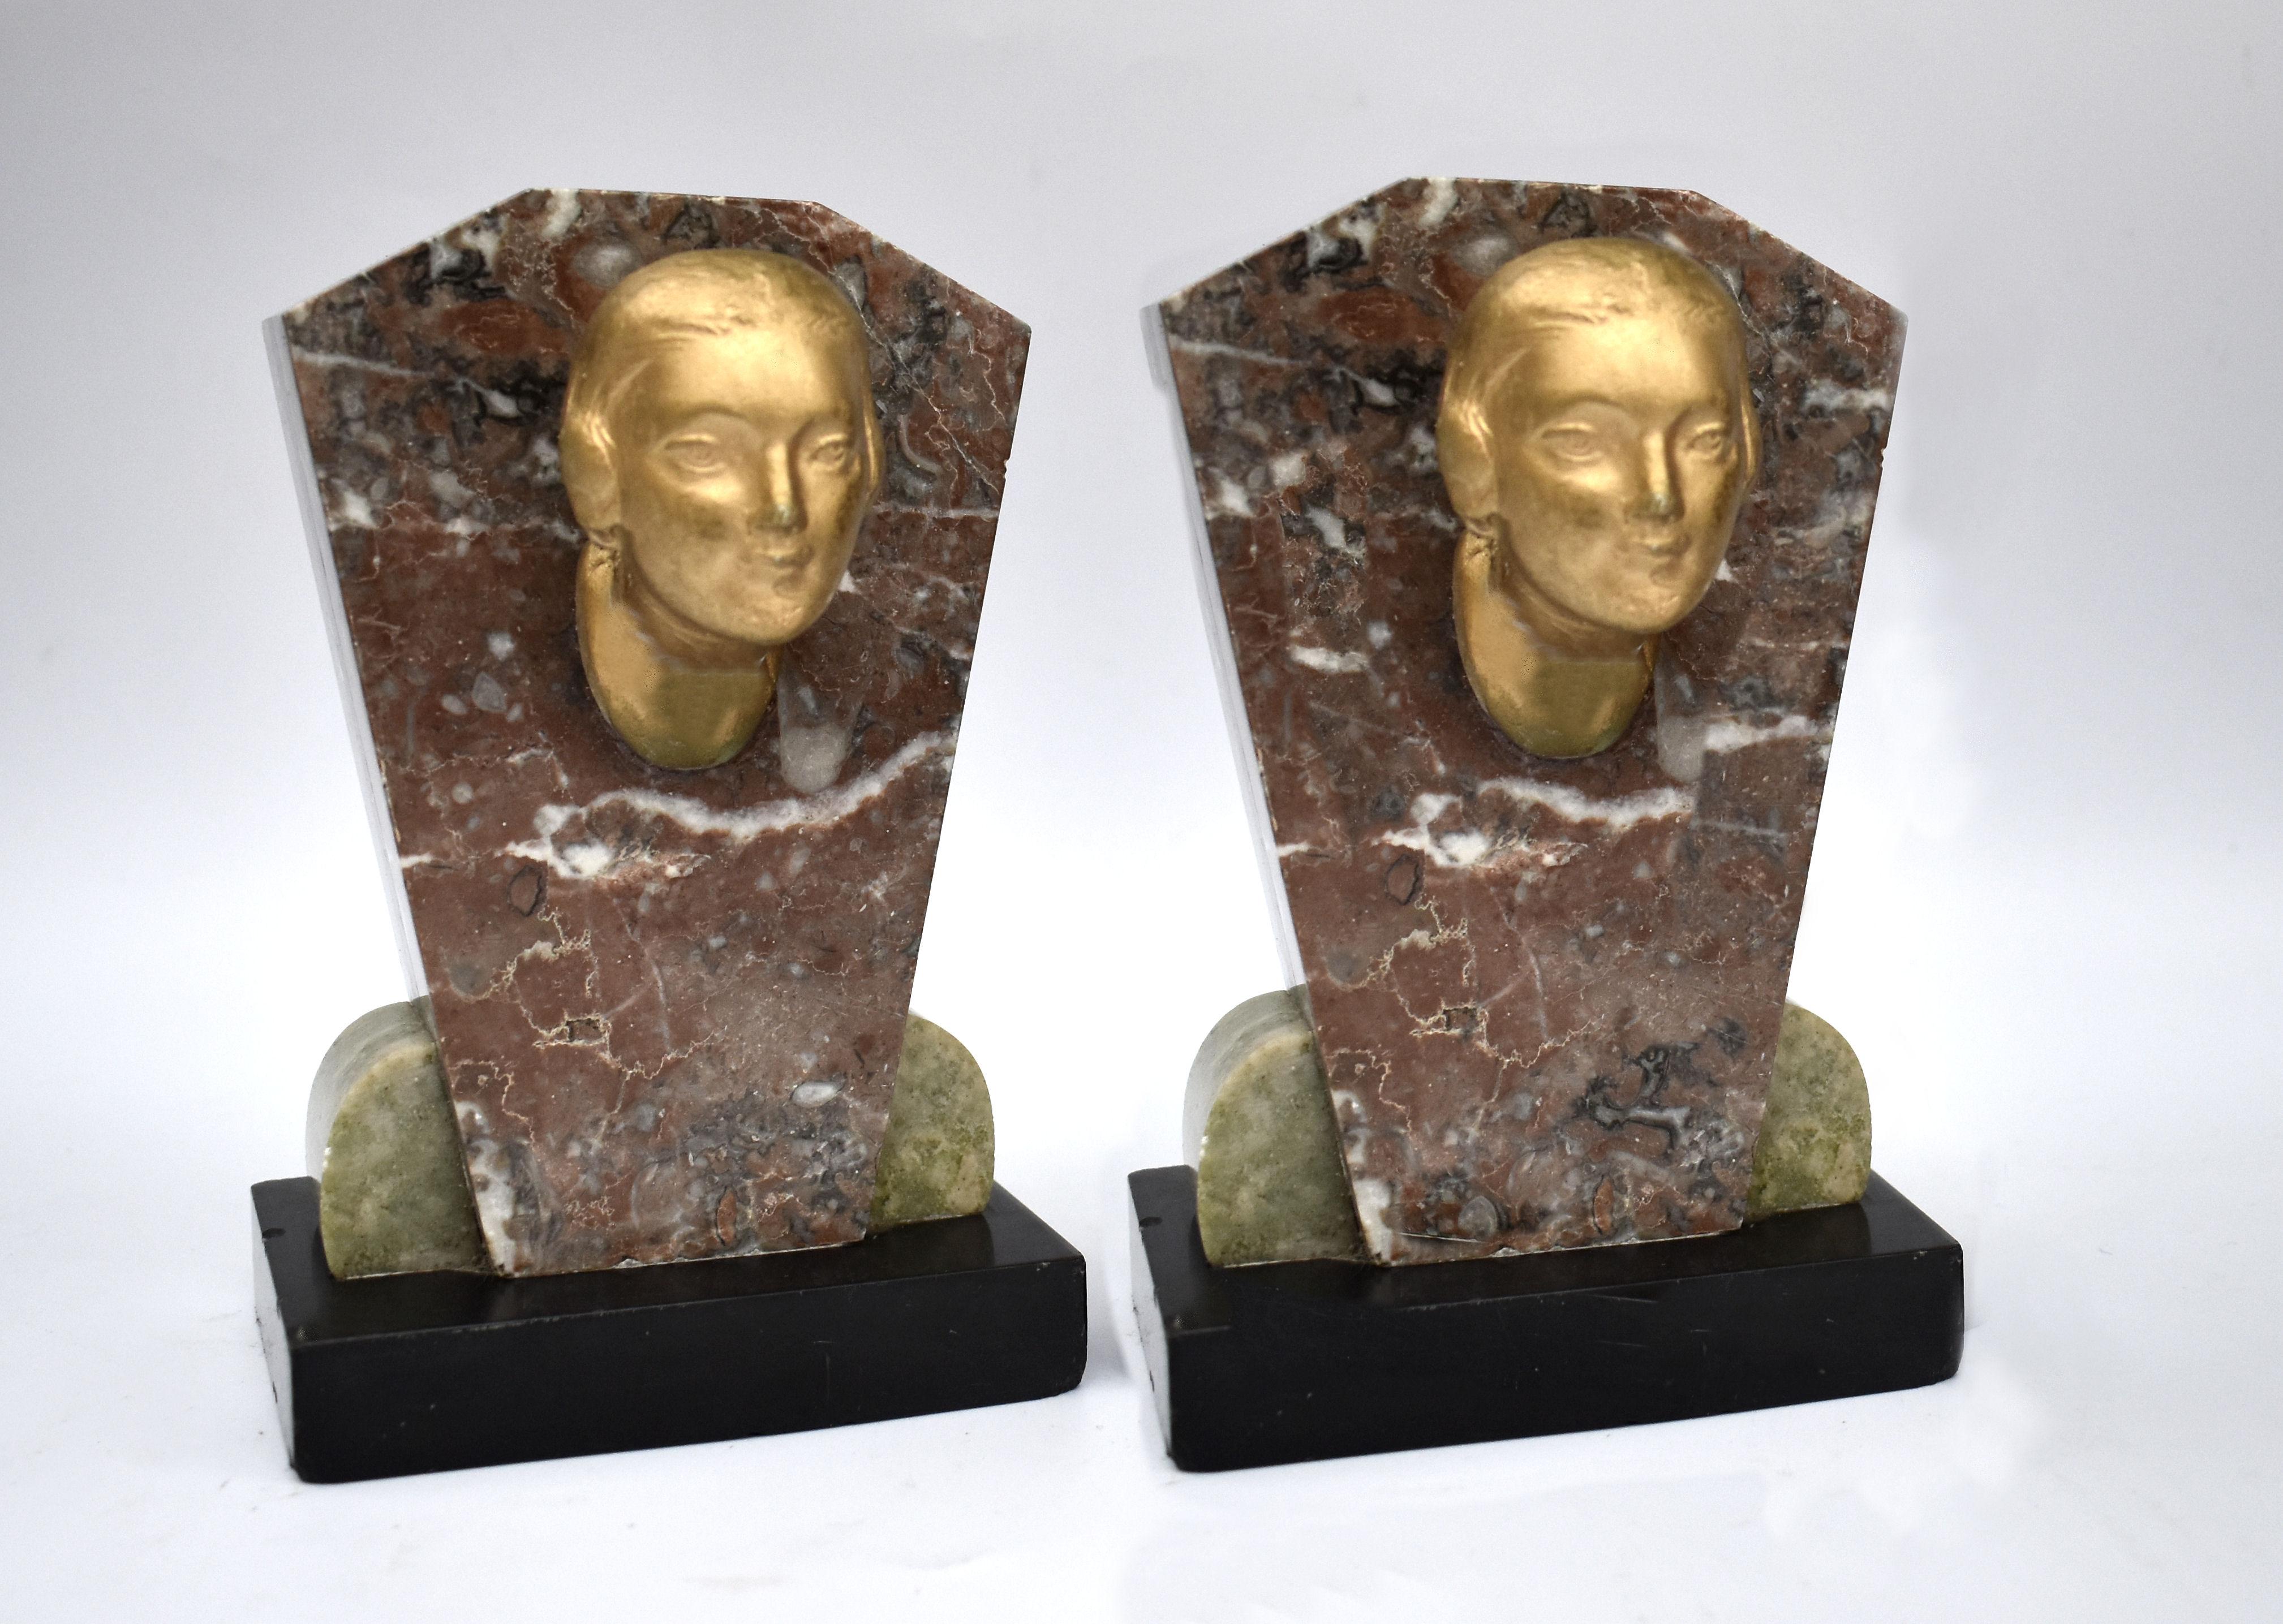 For your consideration are these very attractive matching Art Deco bookends which date to the 1930s. Originating from France the figures are made from plaster and sit on solid tri coloured marble backs/ plinths. The bookends are quite tall and